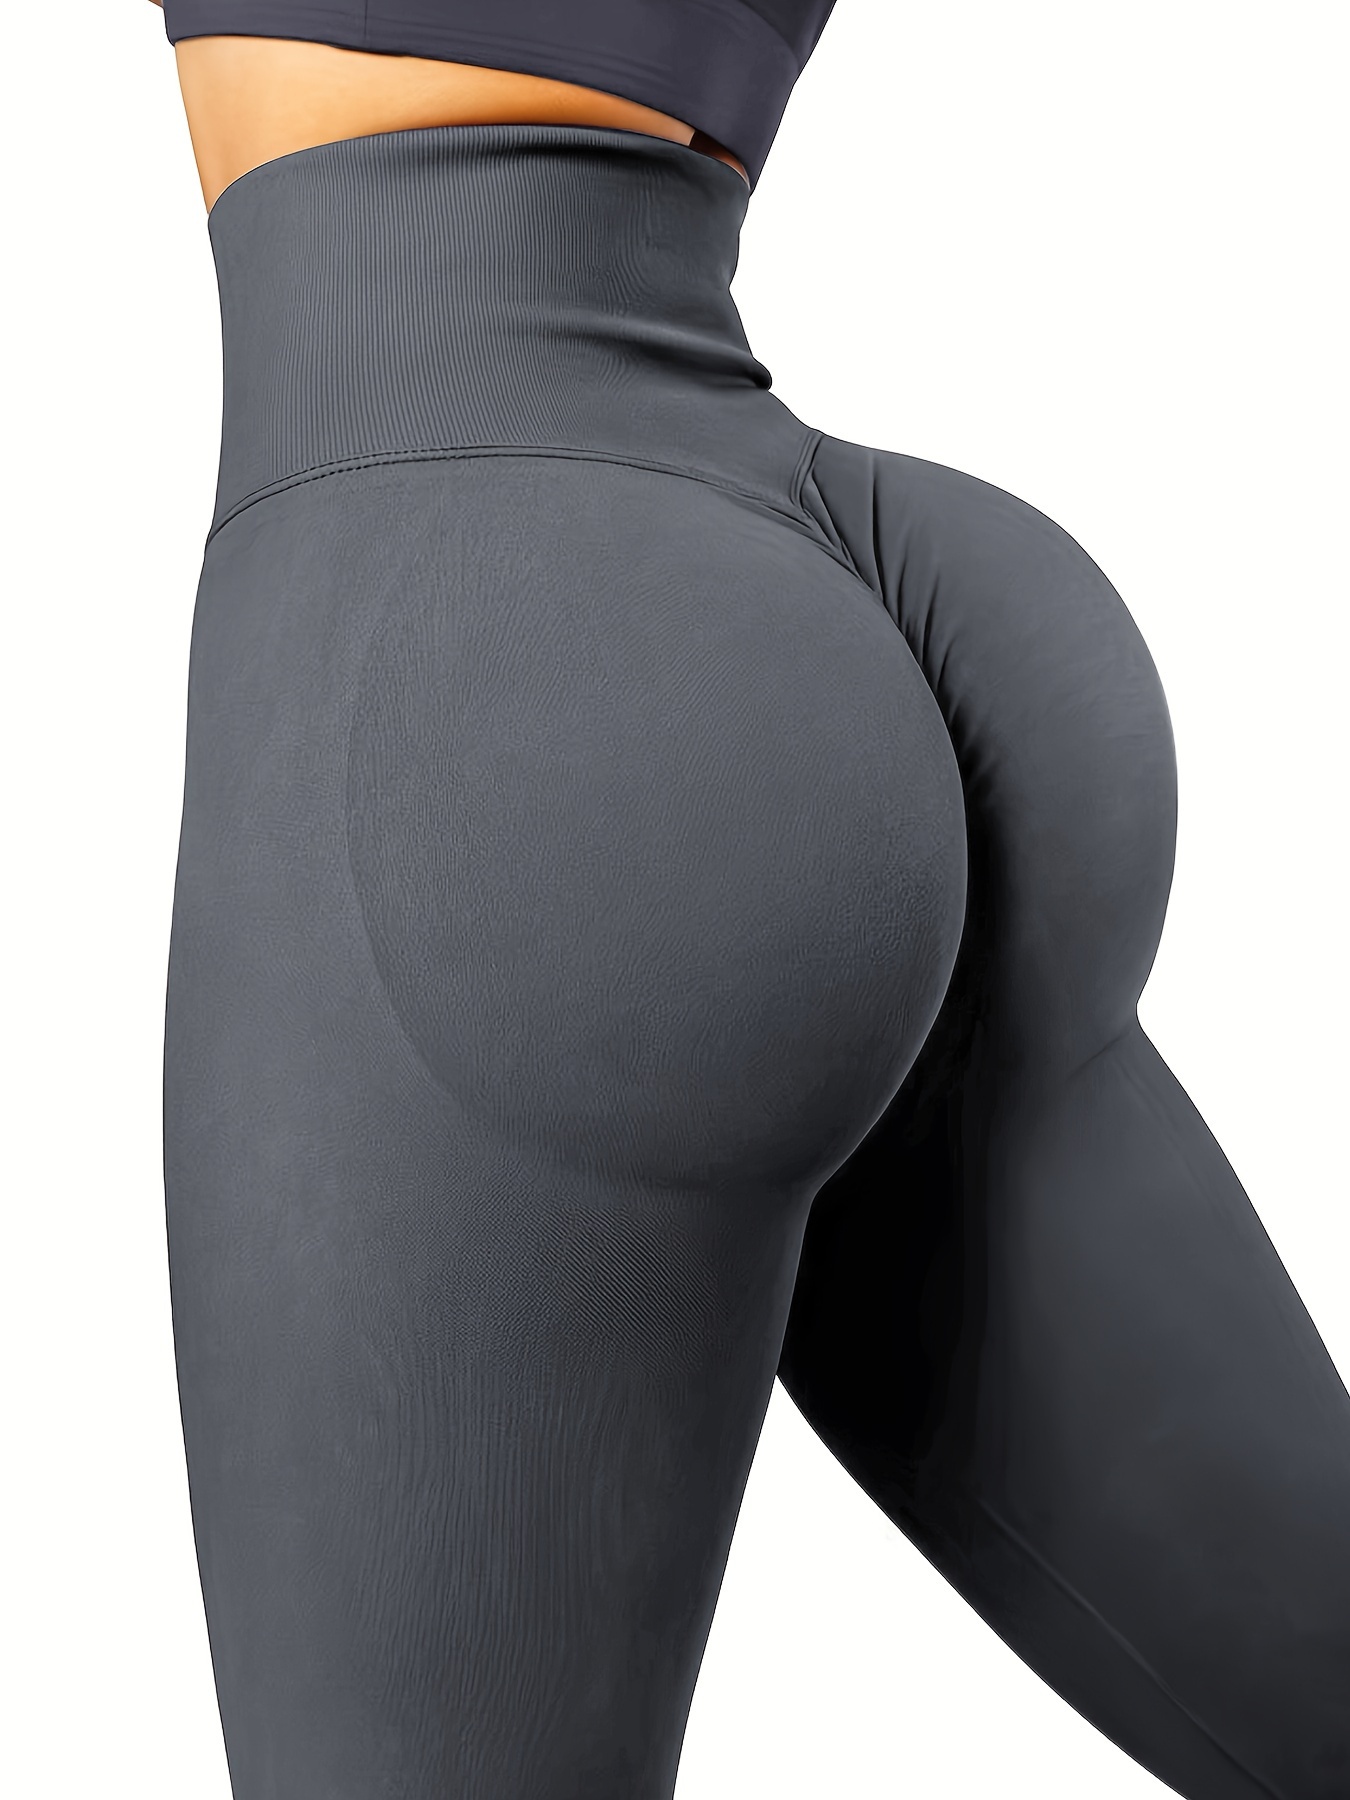 Push Up Leggings Seamless Yoga Pants Butt Lifting Legging For Women Gym  Workout Tights Woman Scrunch Sport Fitness Pant Female